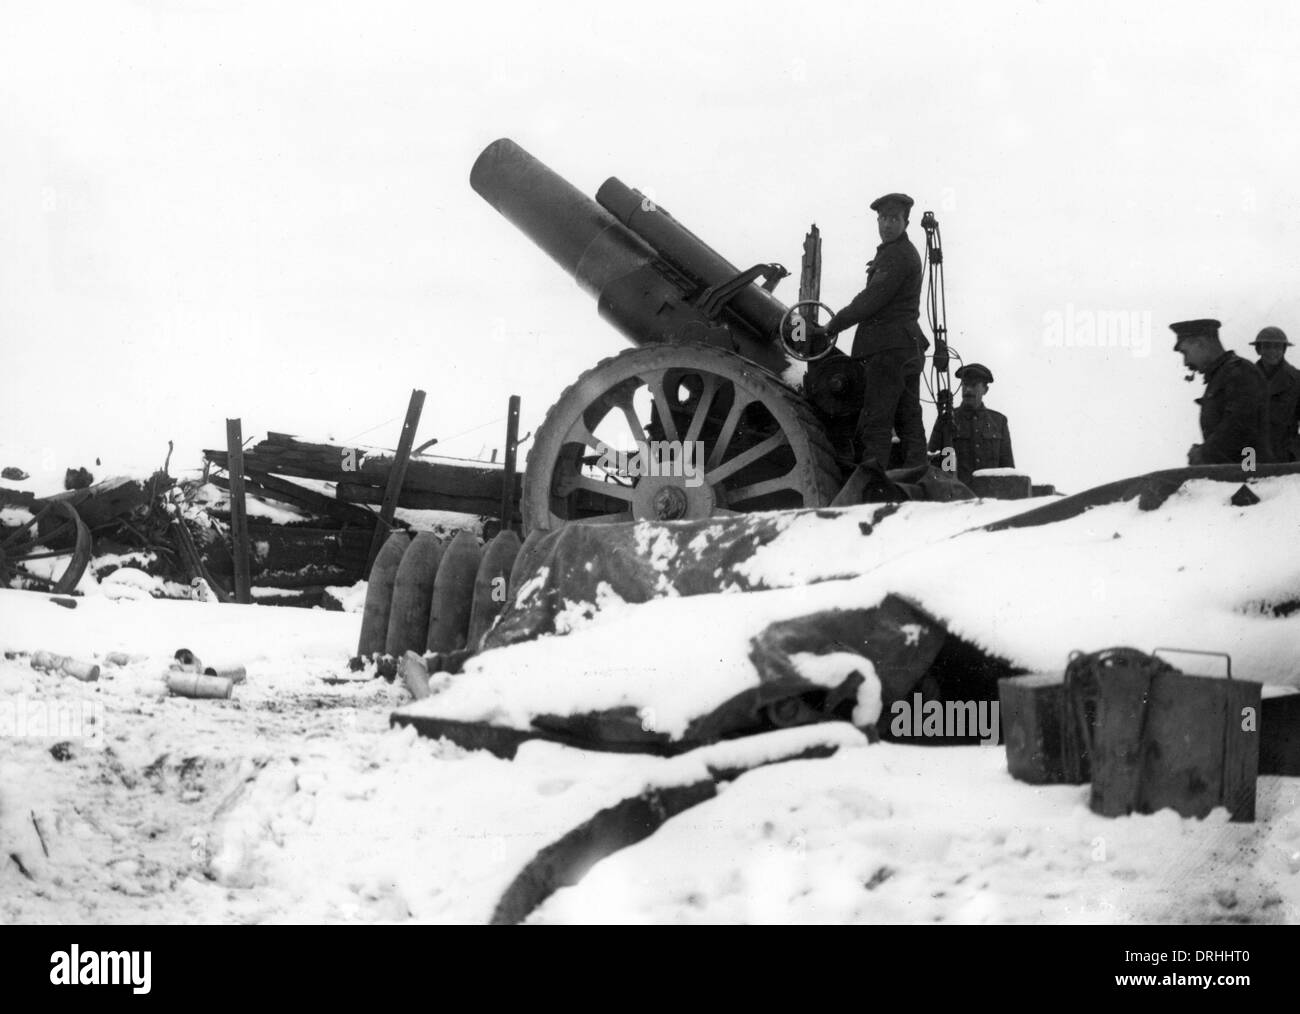 British 8 inch Howitzer in snow, Pozieres, France, WW1 Stock Photo